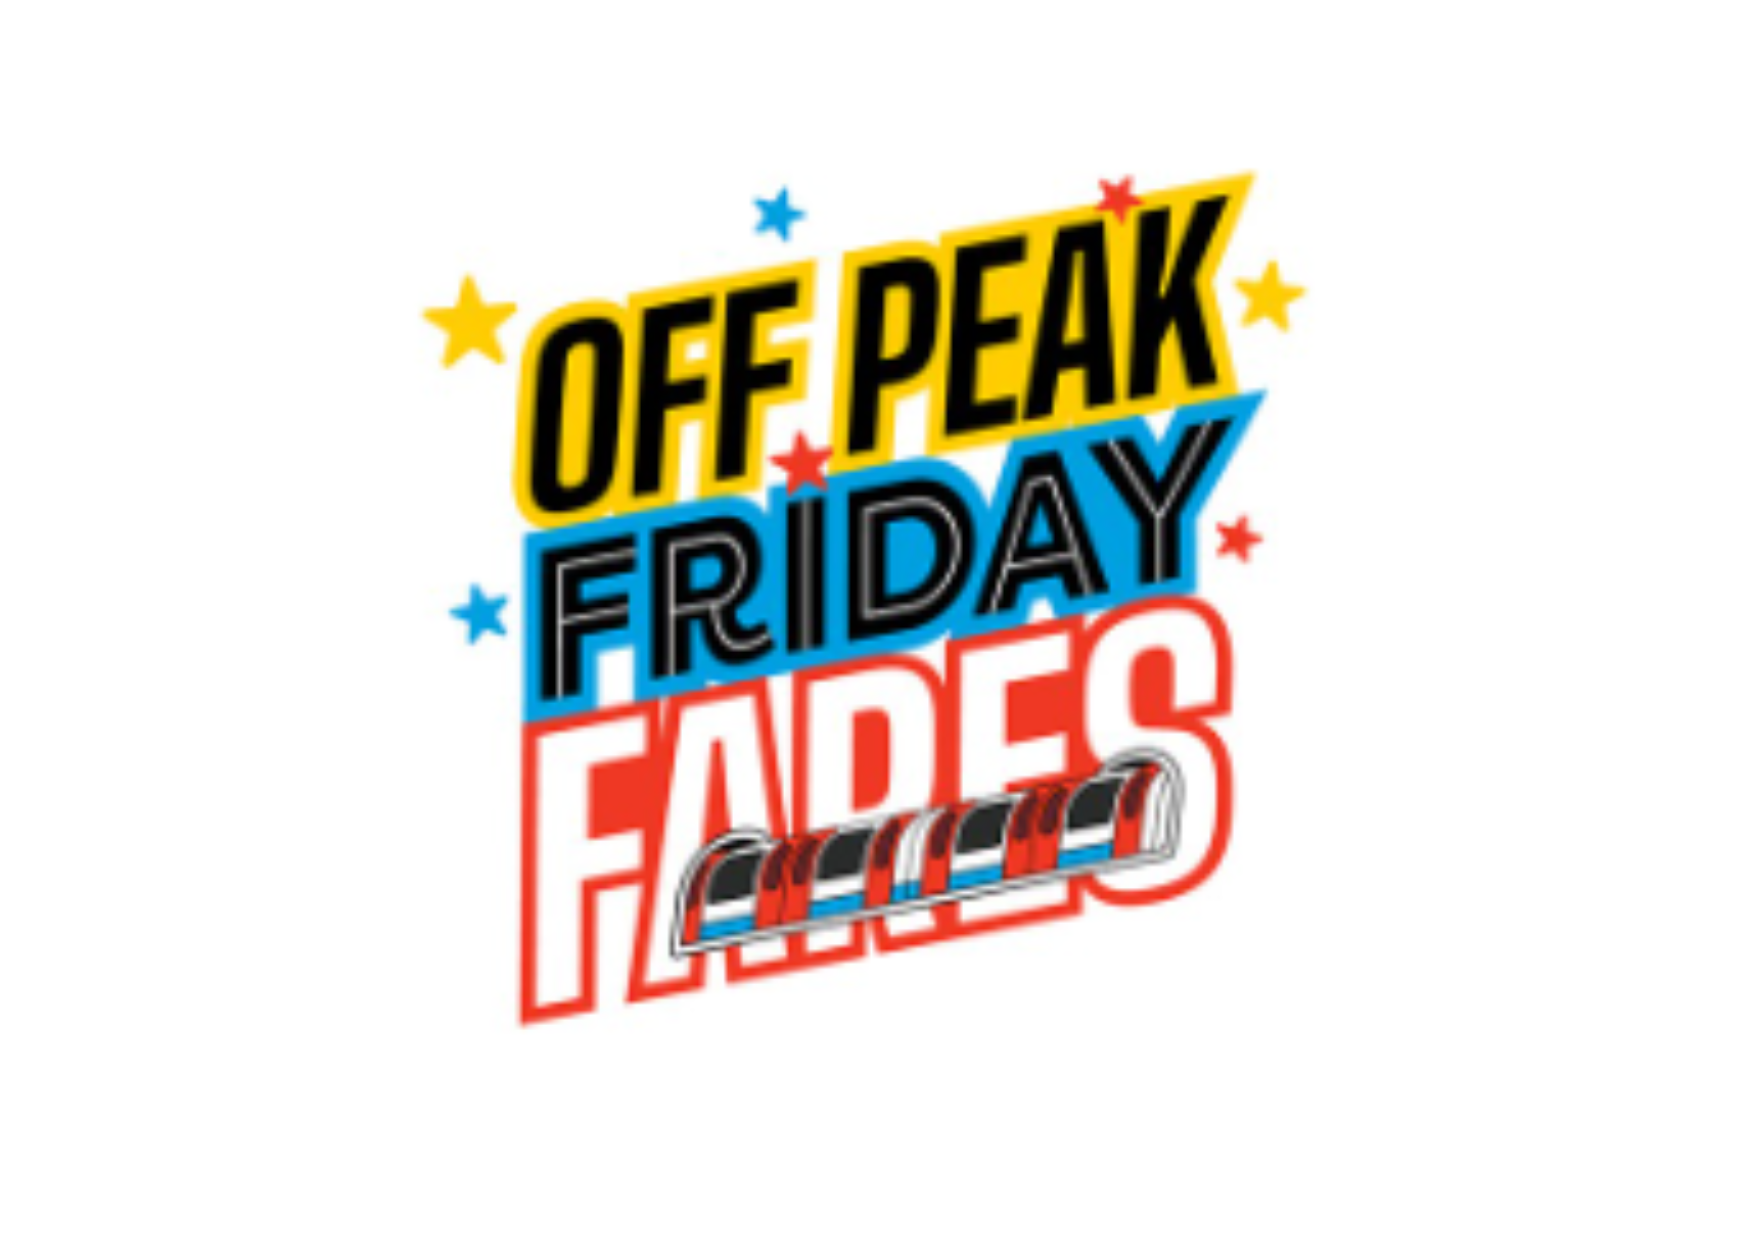 Make the most of Fridays with TfL Off-Peak Friday Fares